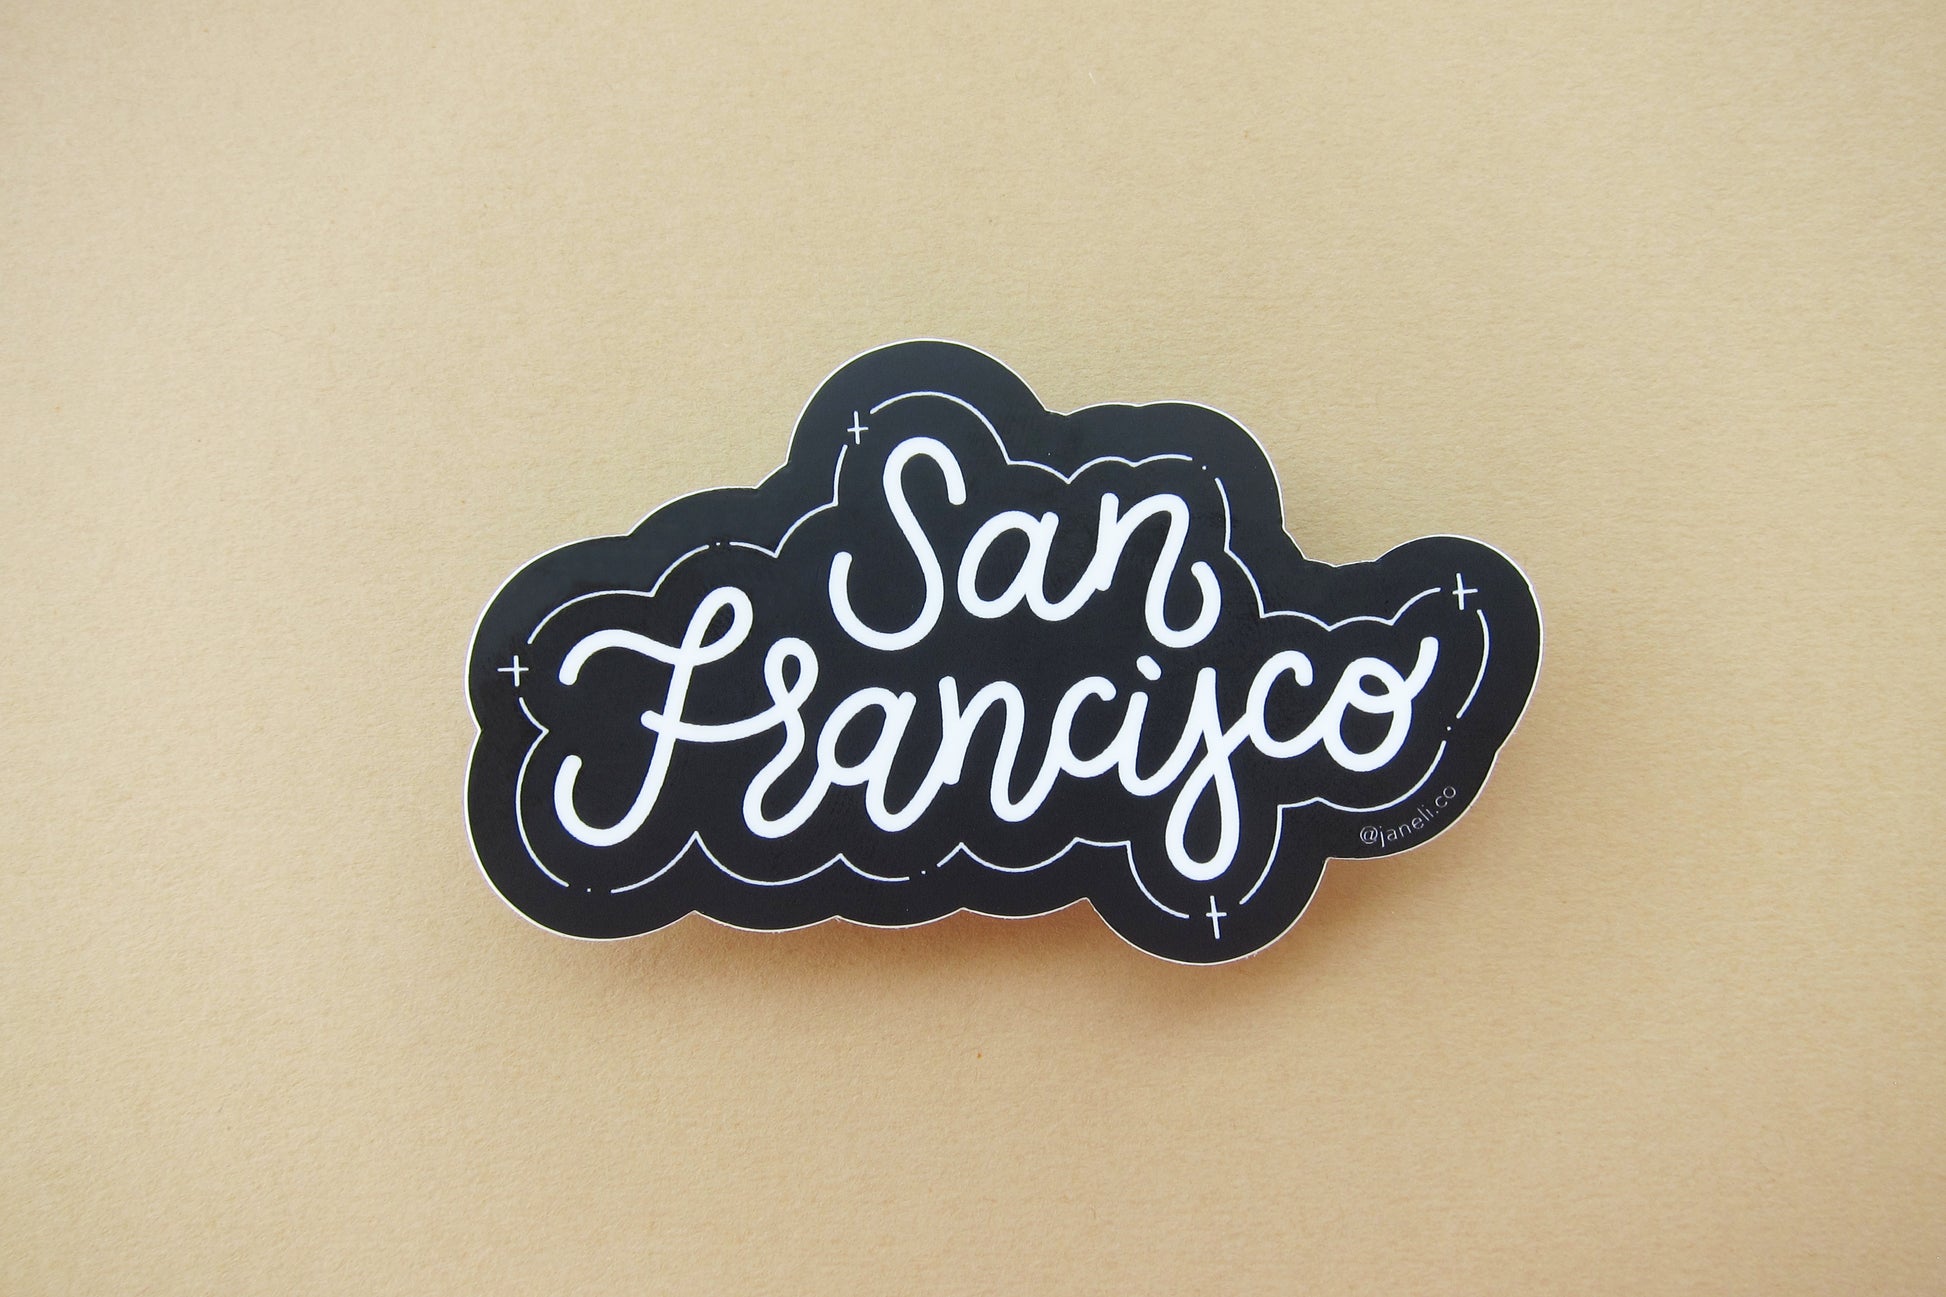 A black and white JaneLi.Co sticker that says "San Francisco" in cursive lettering over a tan background. 